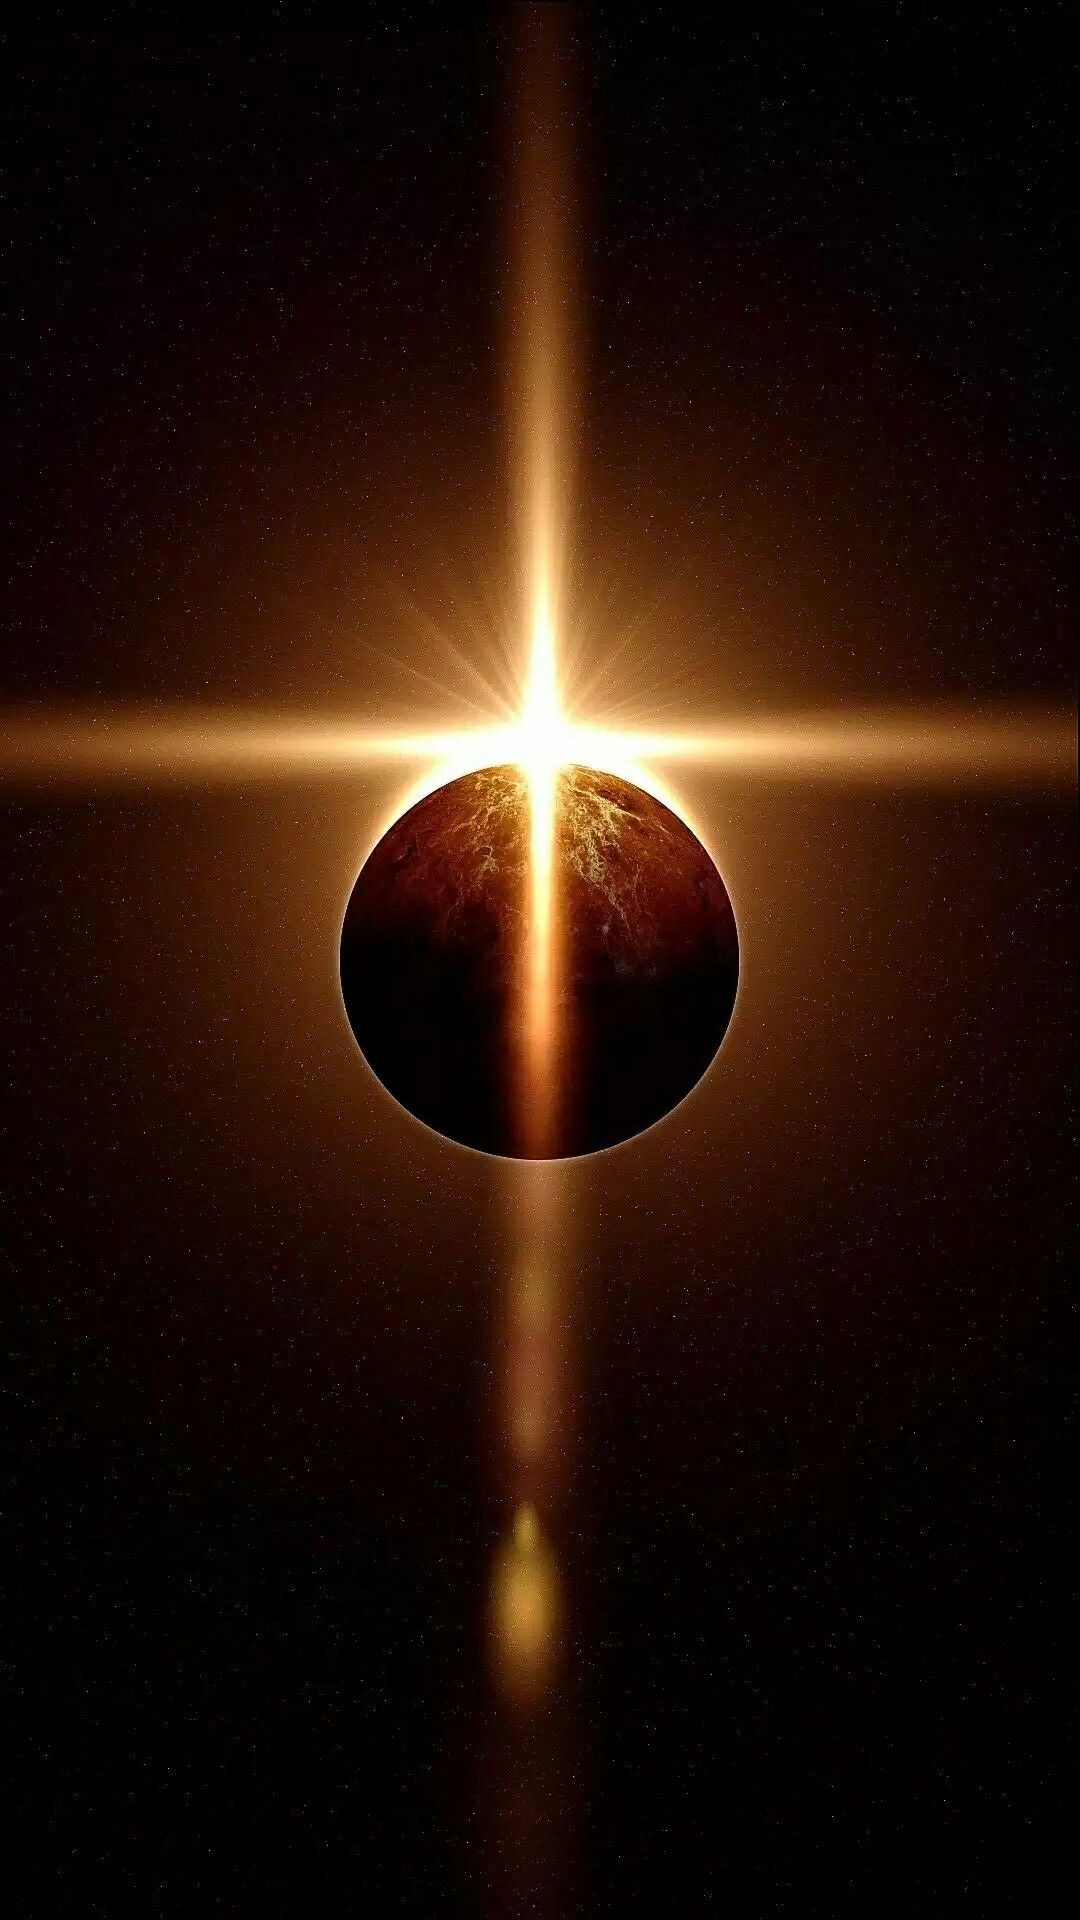 Eclipse Iphone Wallpapers